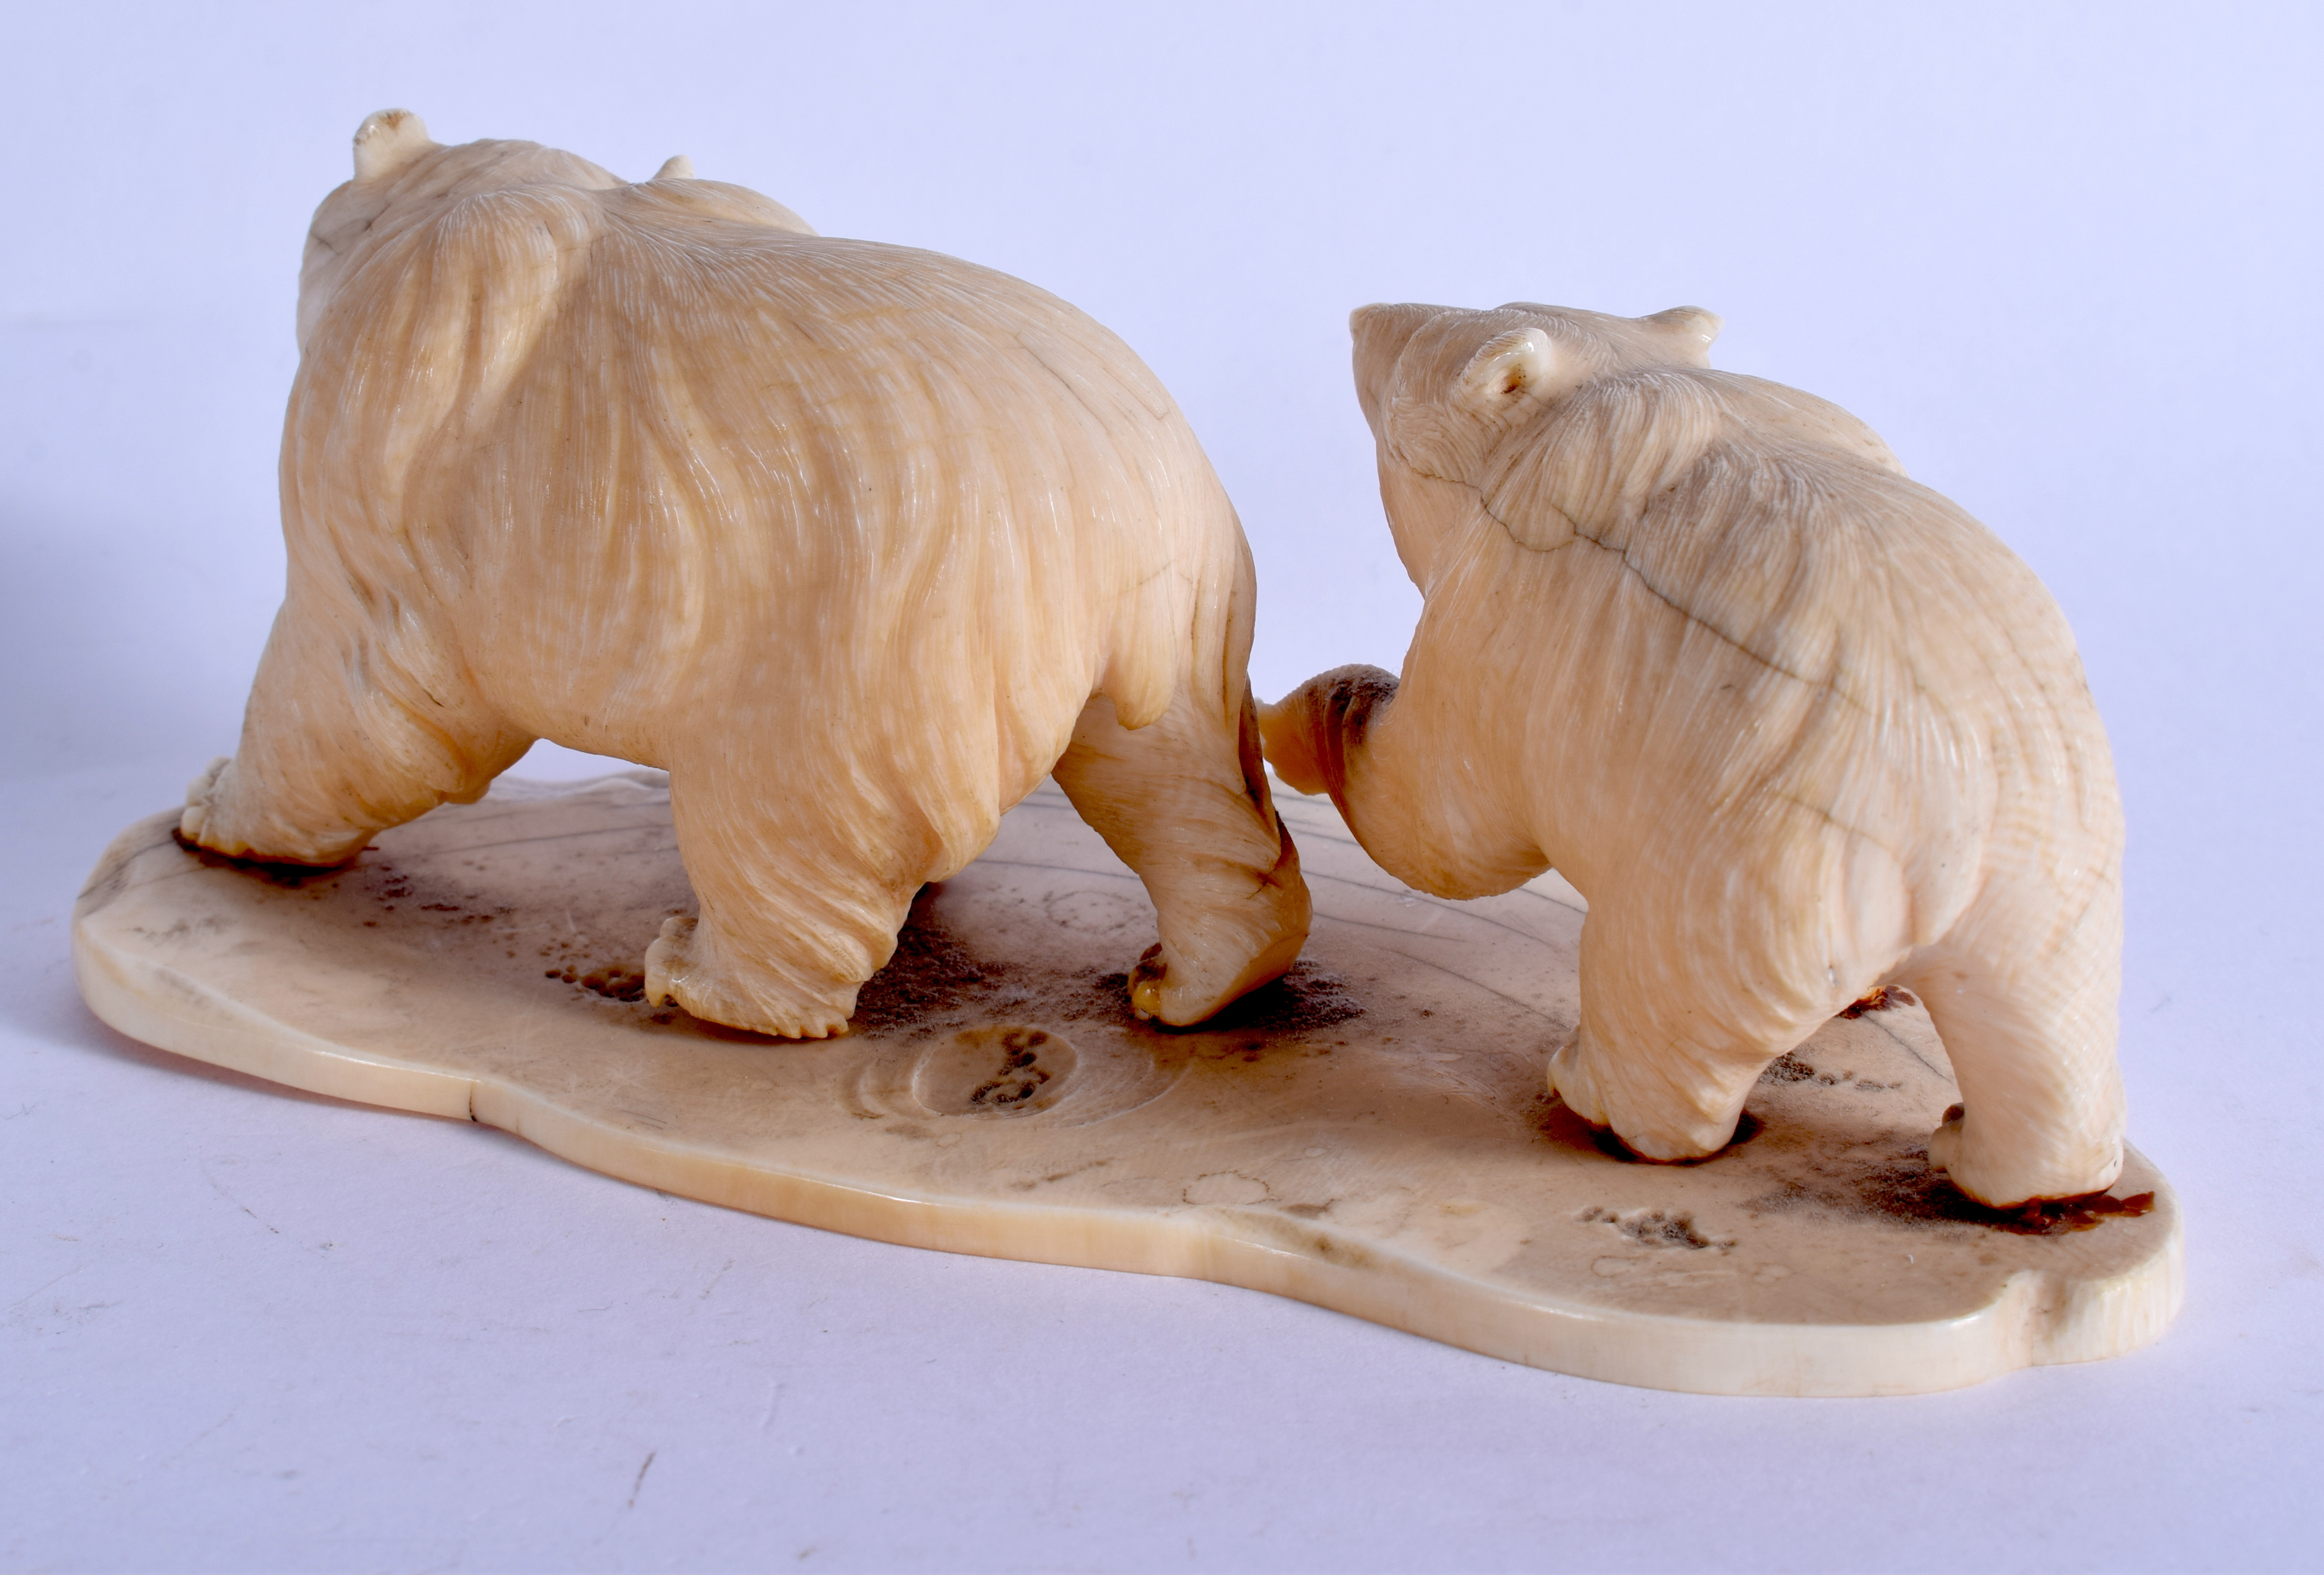 A 19TH CENTURY JAPANESE MEIJI PERIOD CARVED IVORY OKIMONO modelled as roaming bears. 14 cm x 6 cm. - Image 3 of 4